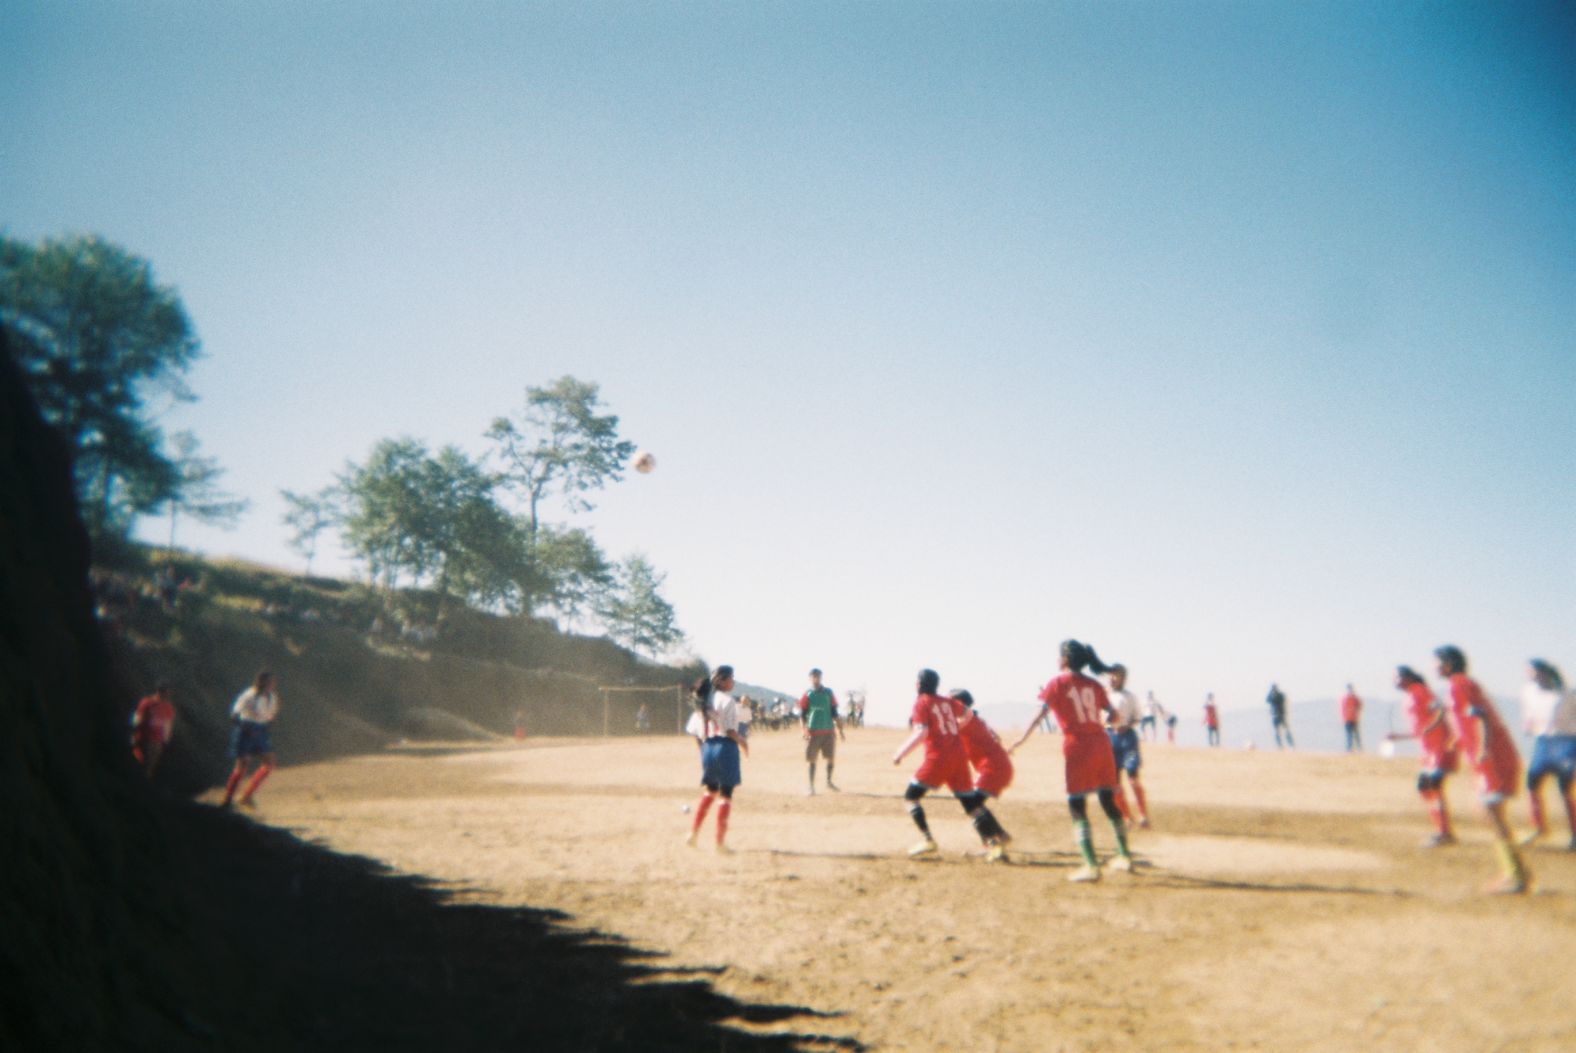 Mingma says: "I was looking to show the passion that the girls were displaying in front of me, in front of the teachers and the villagers. They love football and this was one of the rarest opportunities for them to get to play without any hindrances."